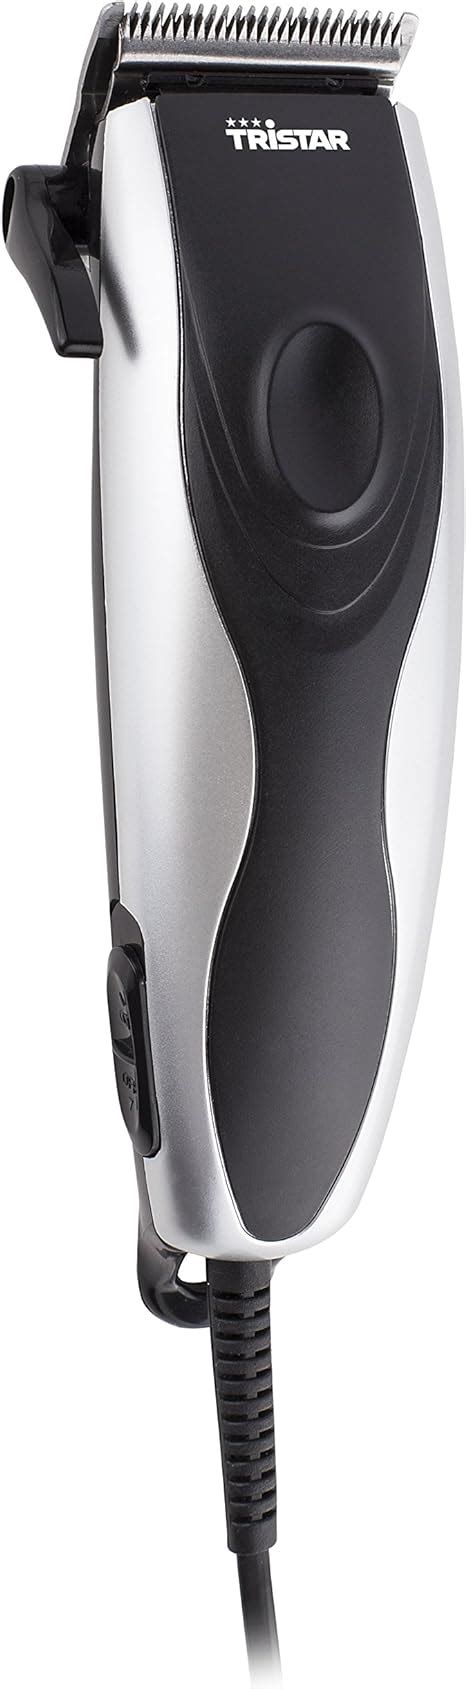 Tristar Hair Trimmer With Four Comb Attachments And Adjustable Cutting